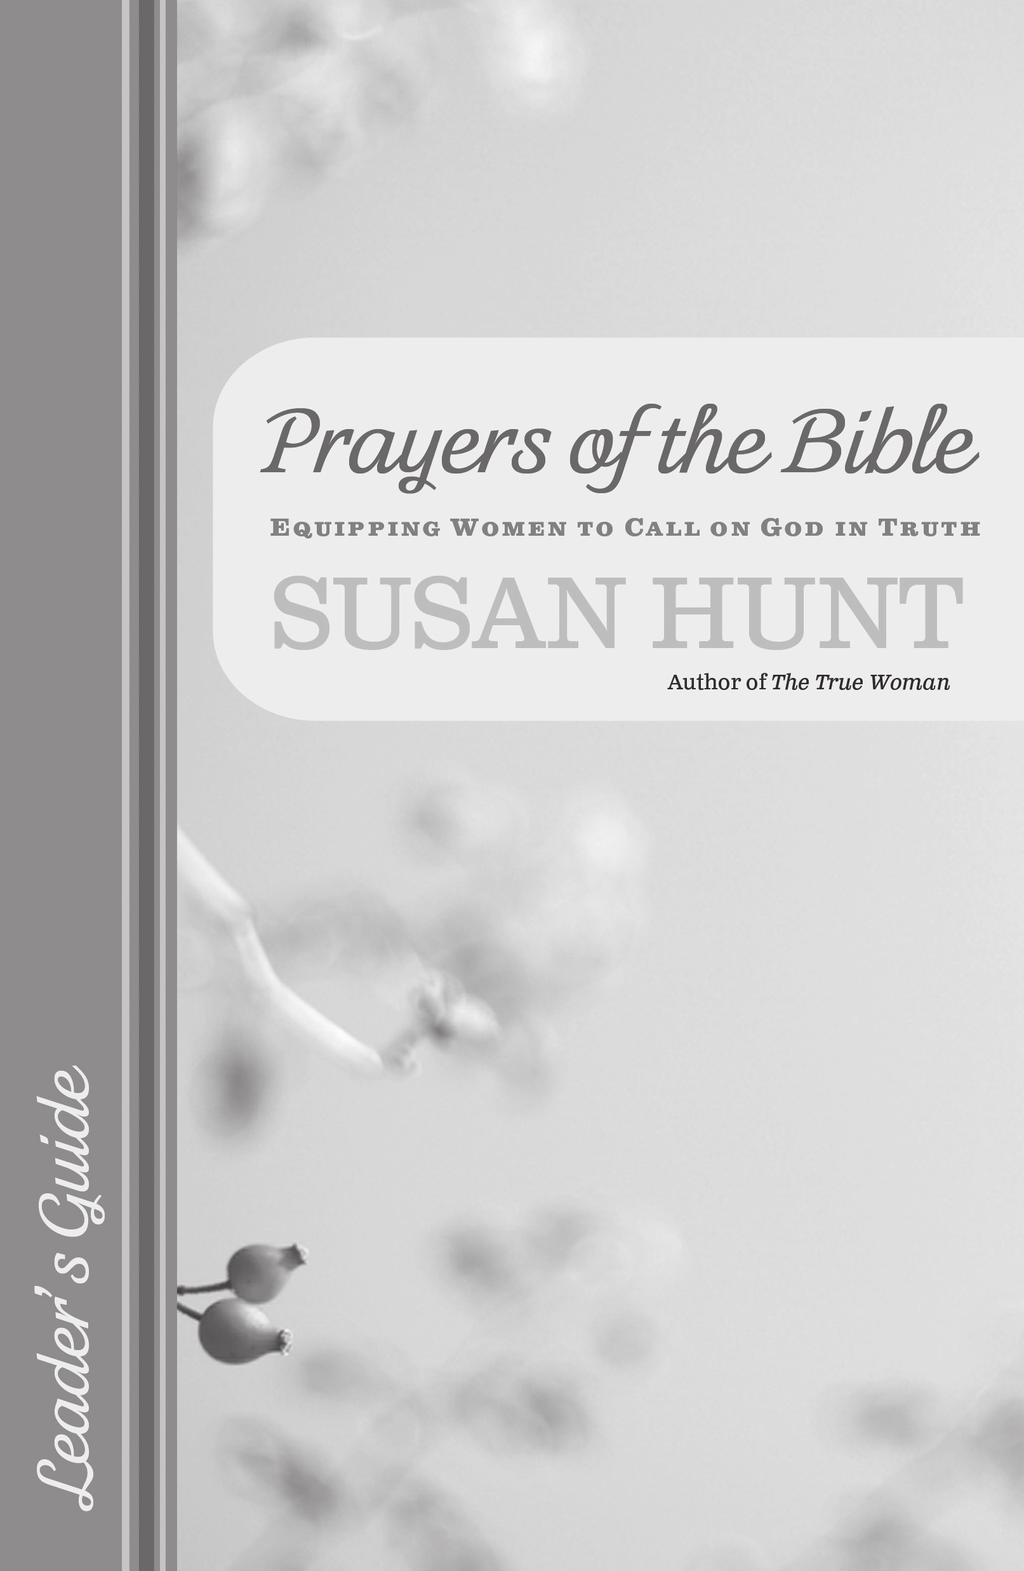 Also Available: The Prayers of the Bible Leader s Guide, by Susan Hunt ISBN: 978-1-59638-388-3, Price: $14.